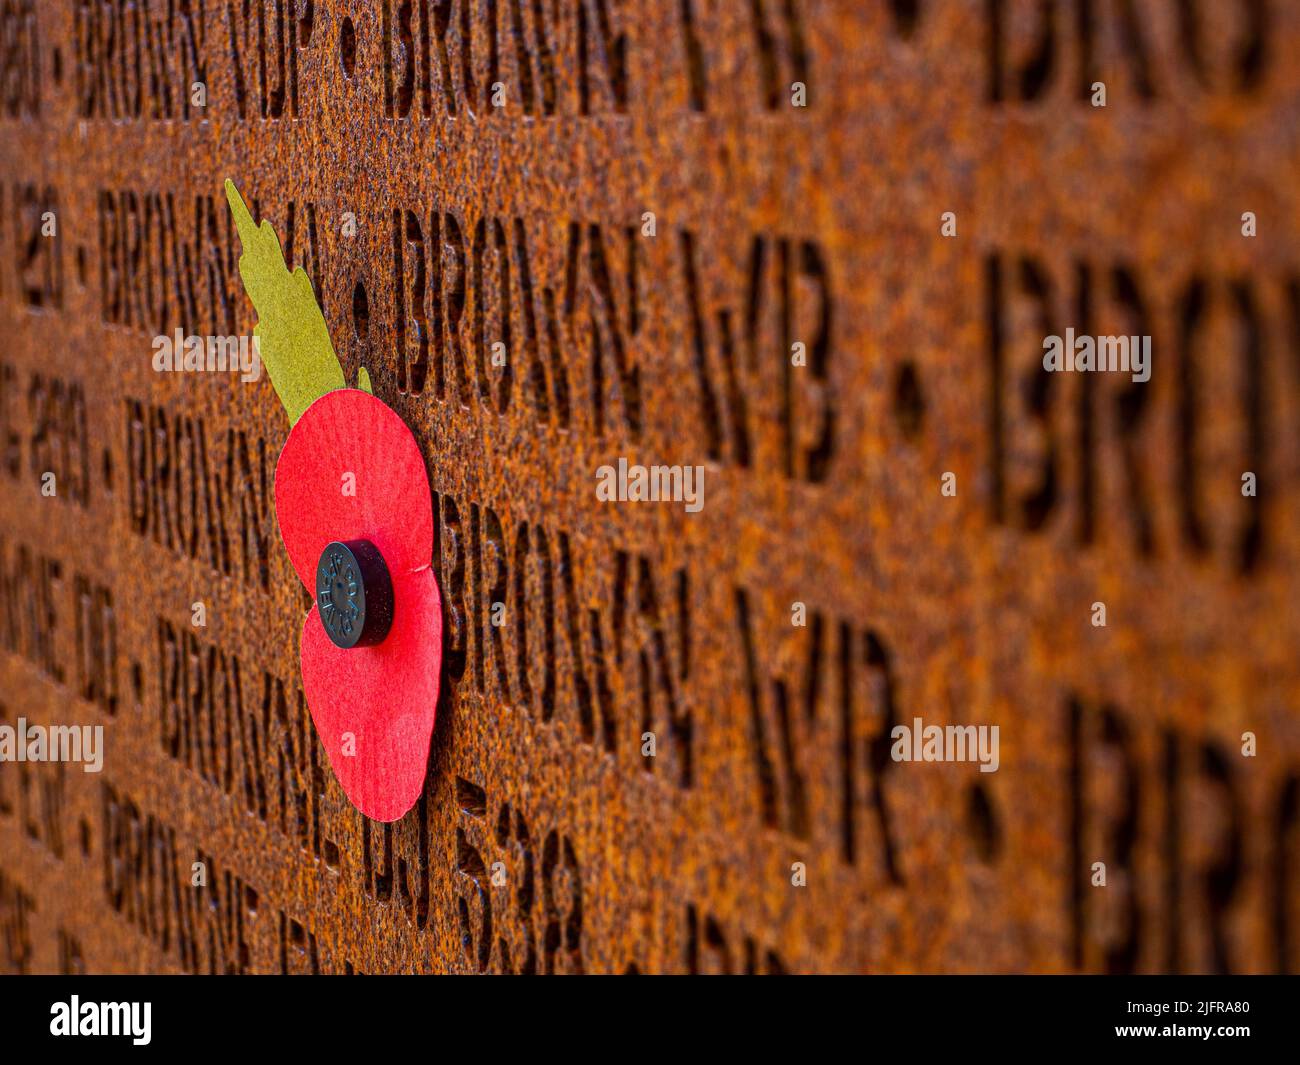 Poppy on the memorial to the 57,000 men who lost their lives during WW2 as part of bomber command. Stock Photo